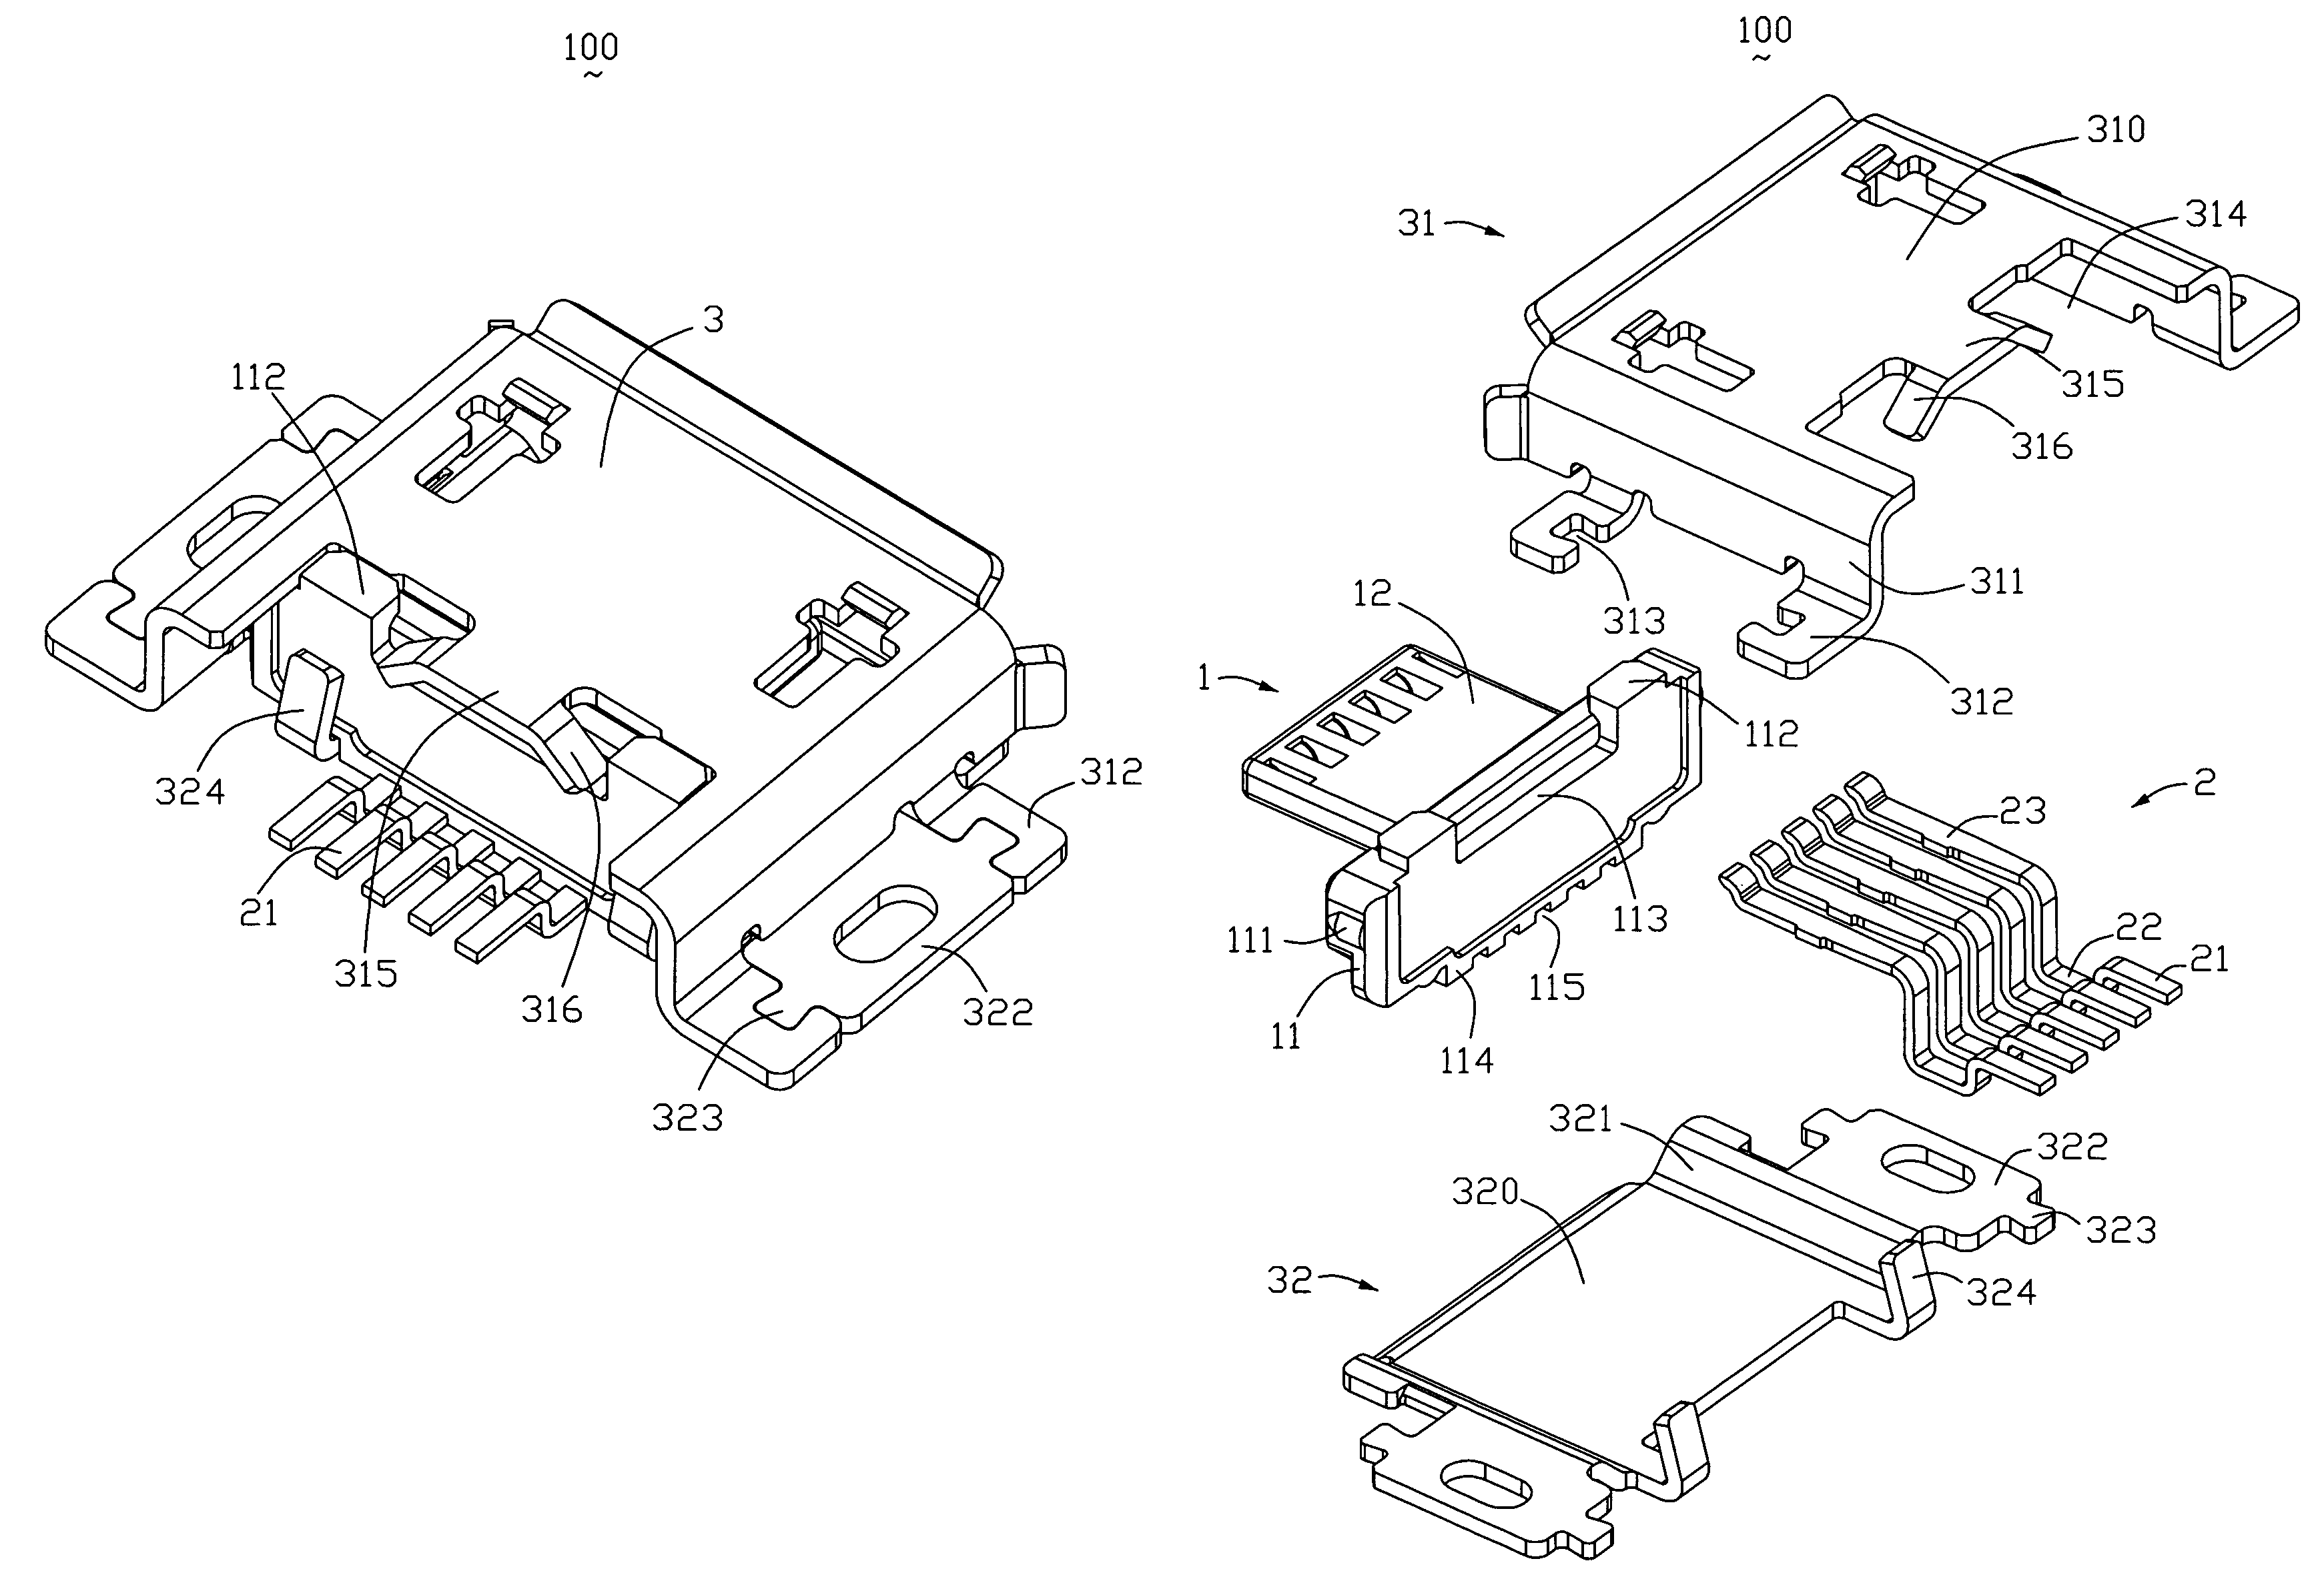 Low profile receptacle connector straddle-mounted on the PCB